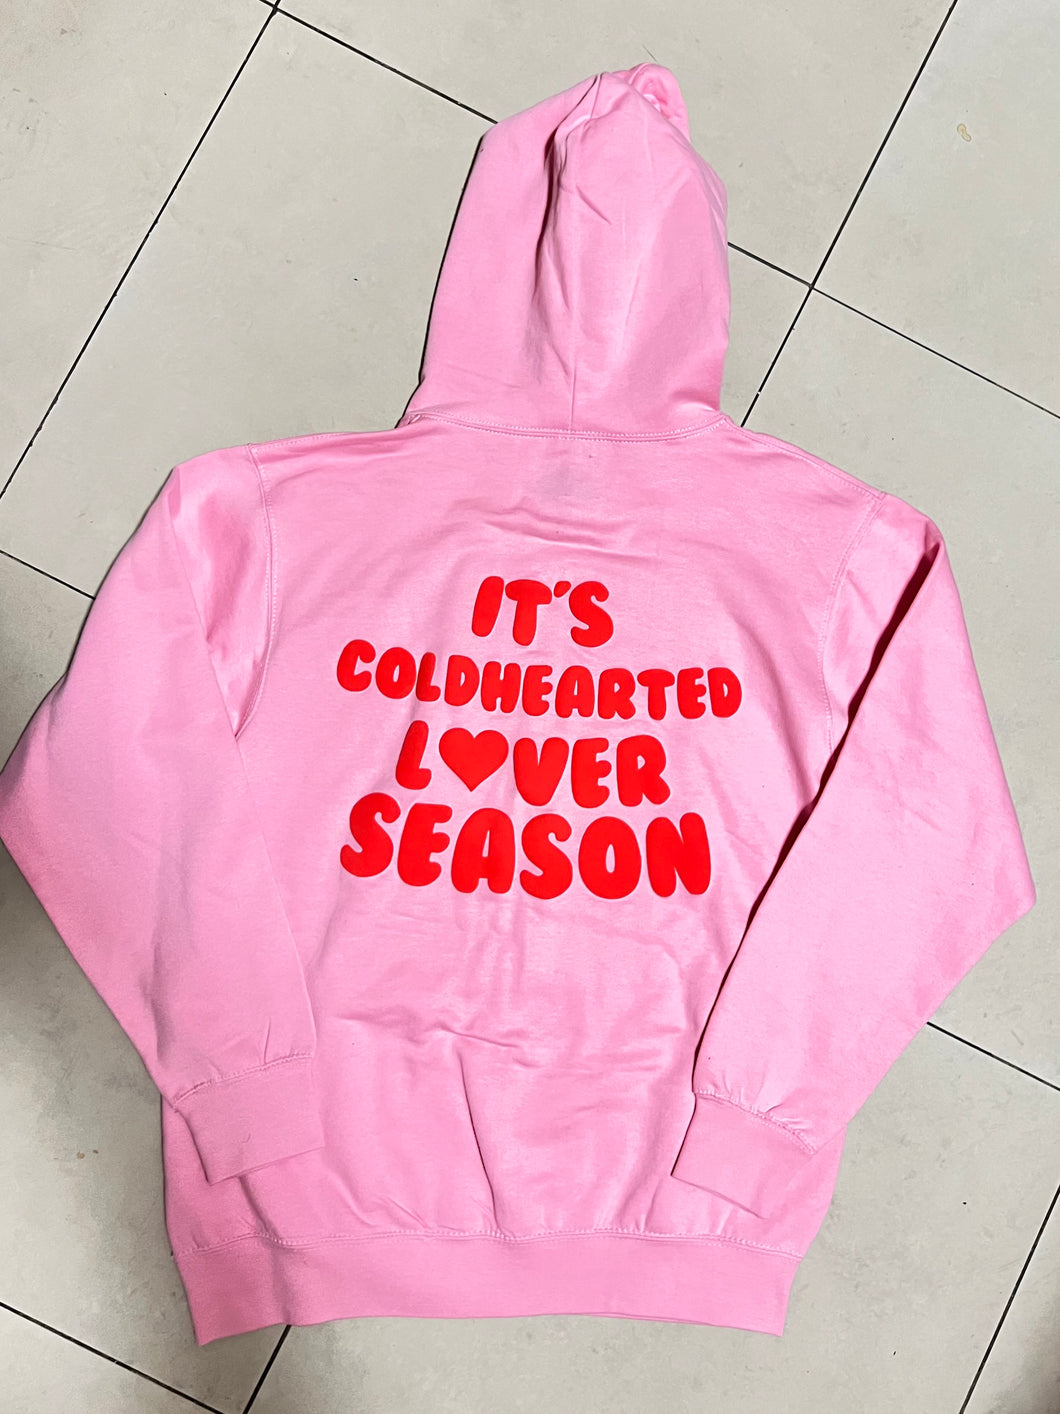 COLDHEARTED LOVER SZN HOODIE